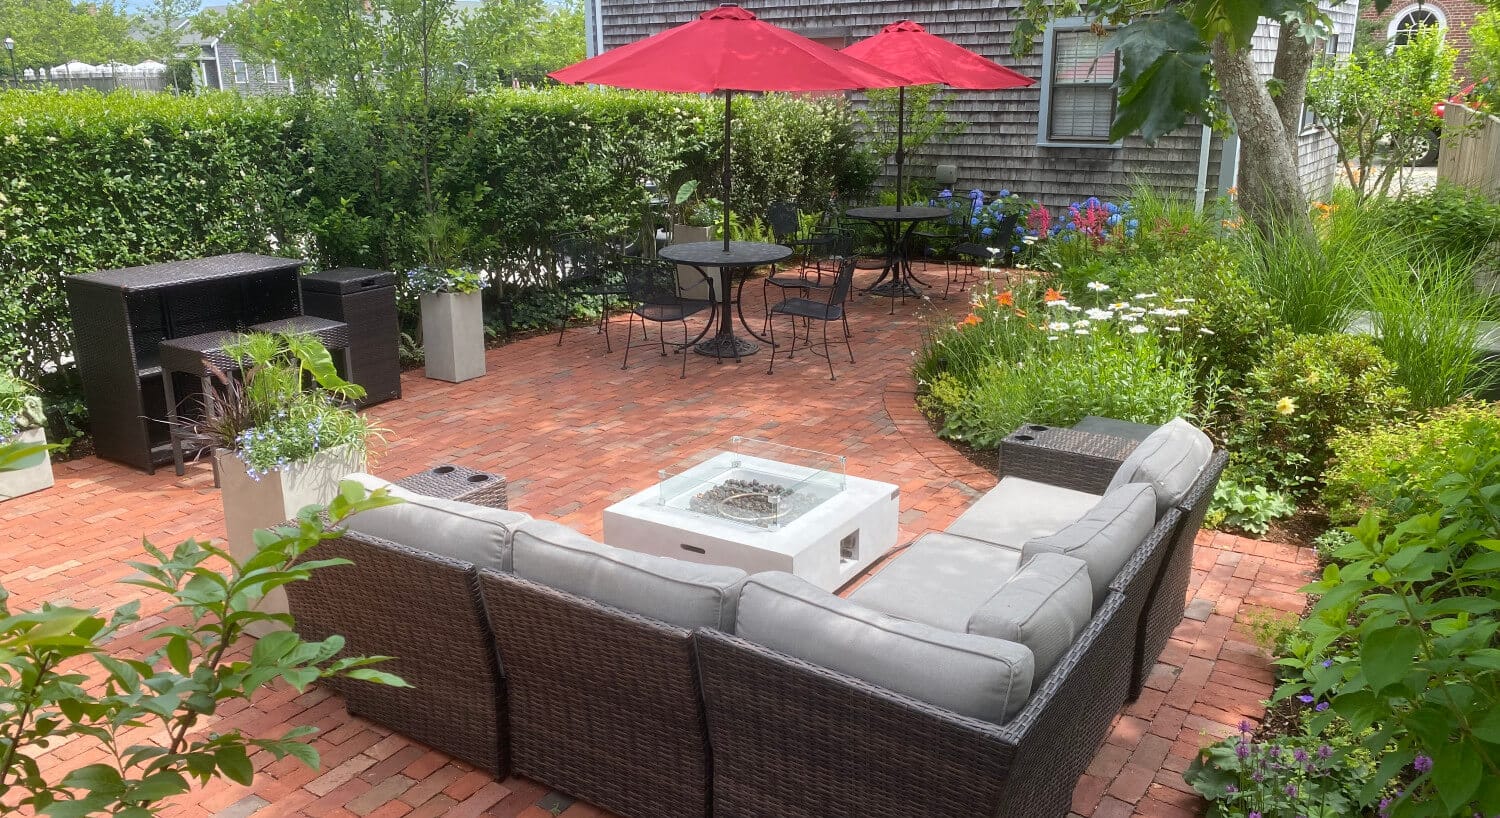 Exterior view of the property with large red brick patio with patio tables,chairs, wicker sectional, and fire pit surrounded by privacy shrubs, plants, and trees